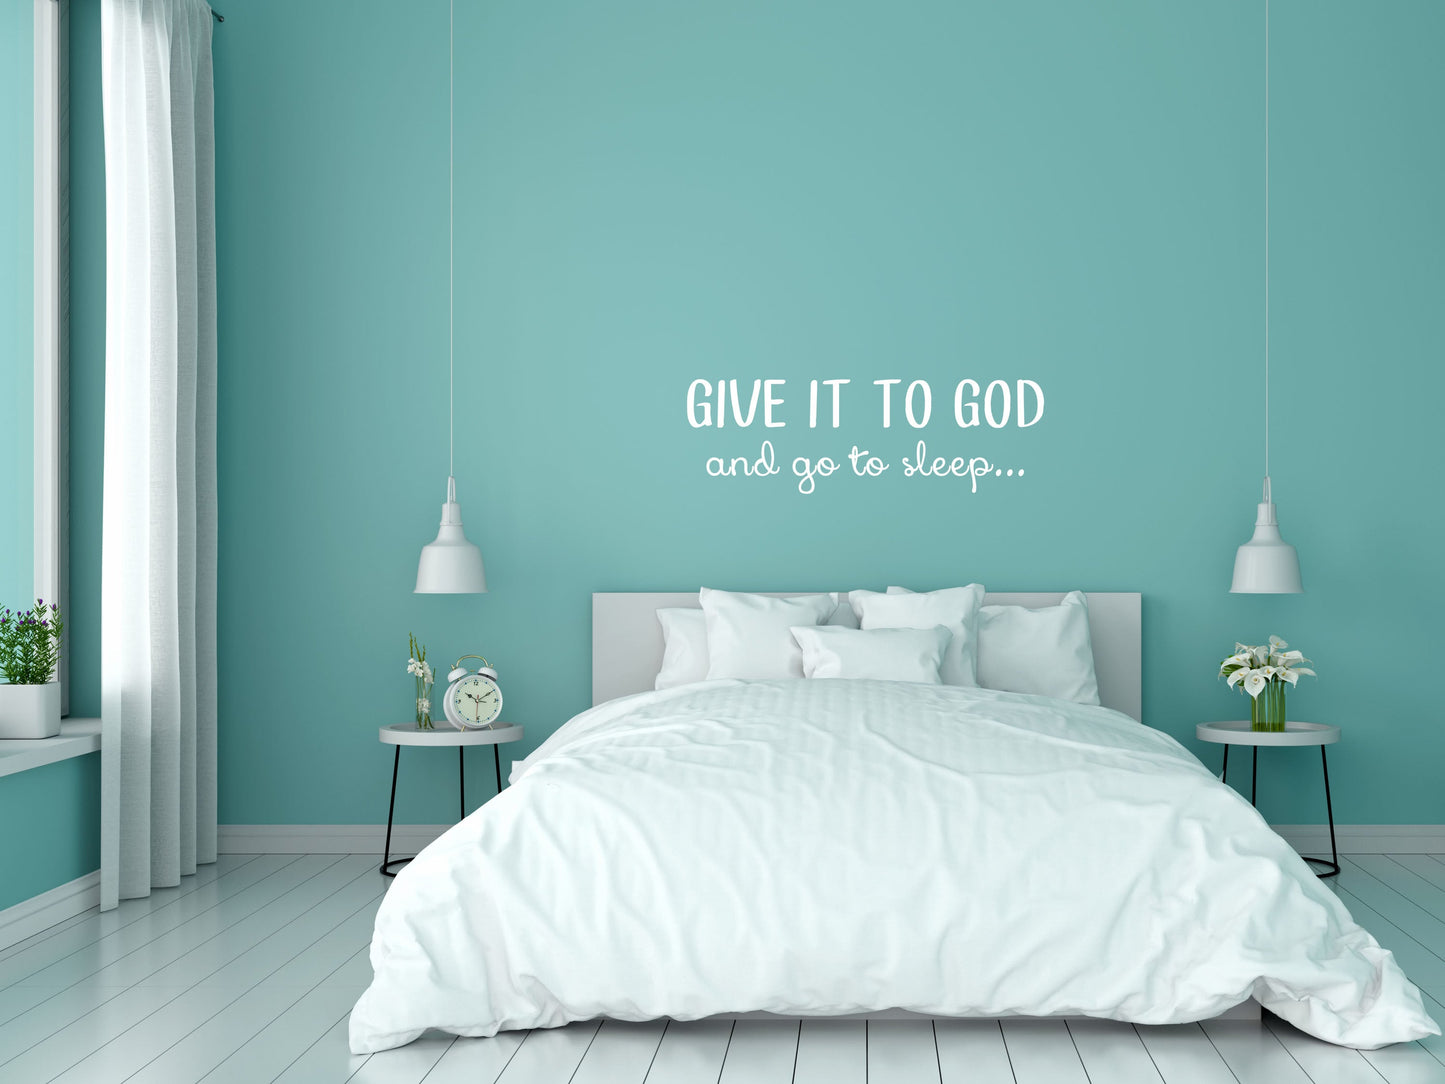 Give It To God And Go To Sleep - Inspirational Wall Decals Vinyl Wall Decal Inspirational Wall Signs 